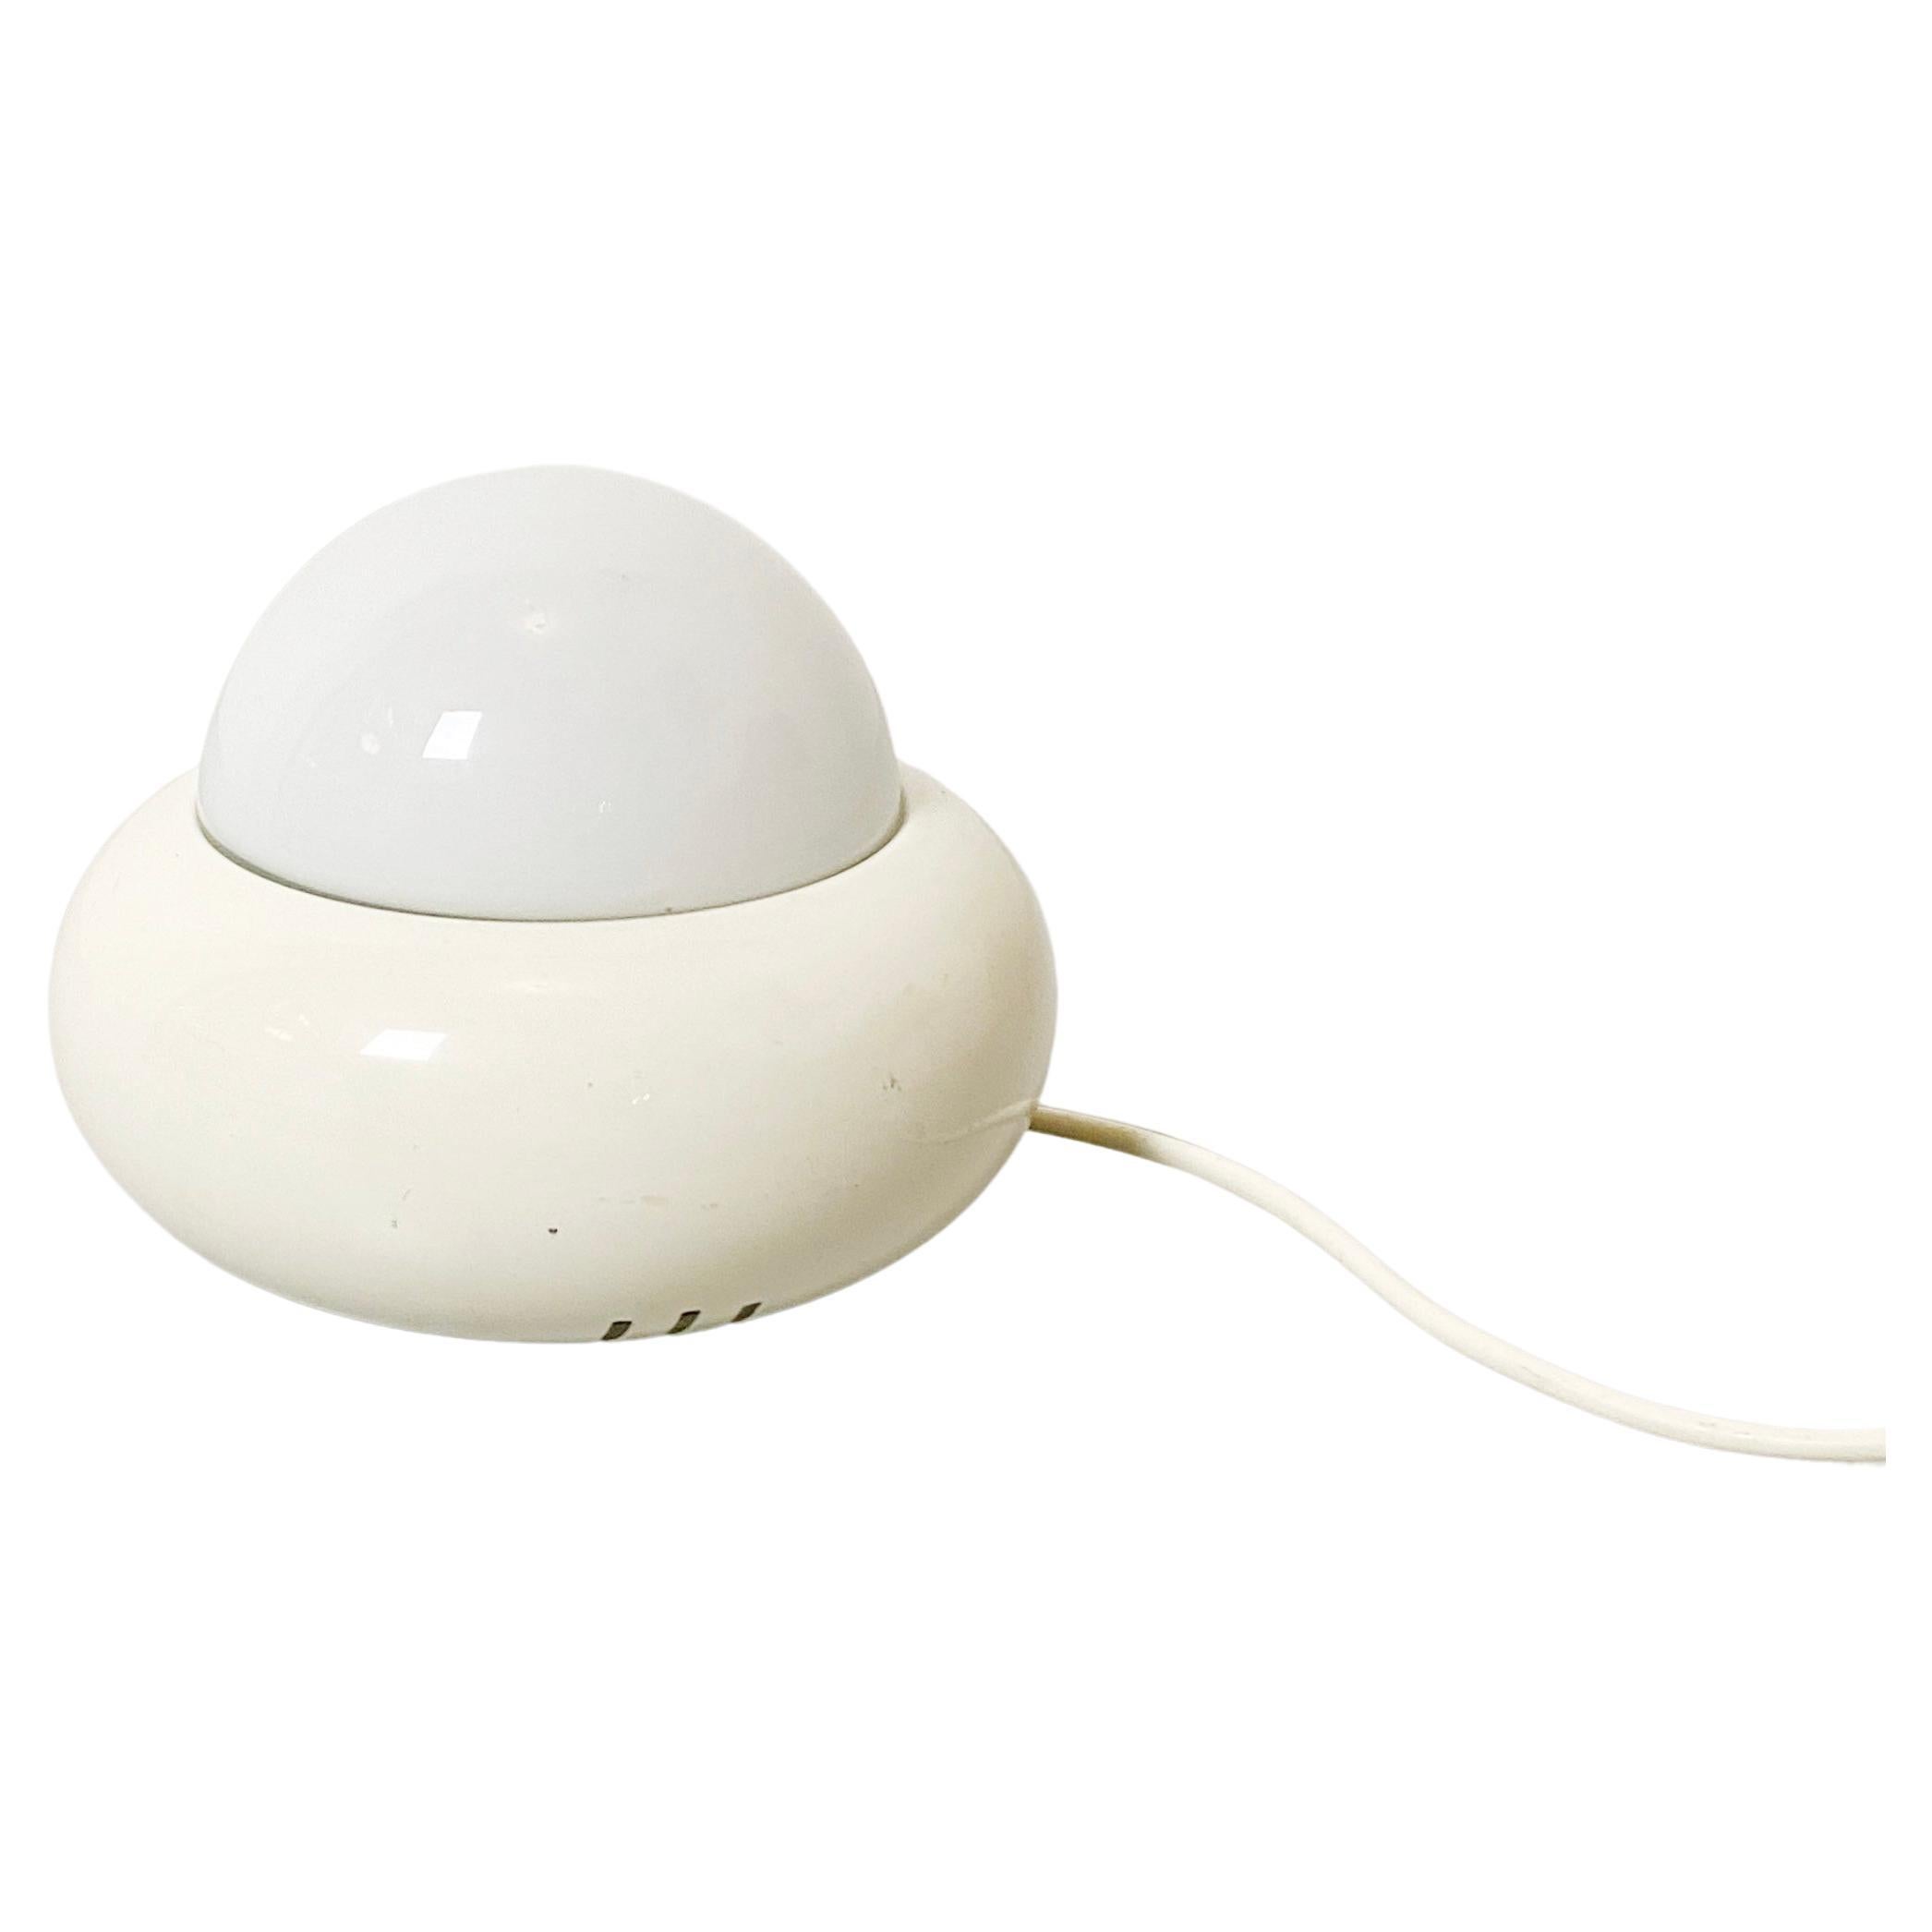 Italian Mid-Century Modern White Table Lamp by Luci, 1970s